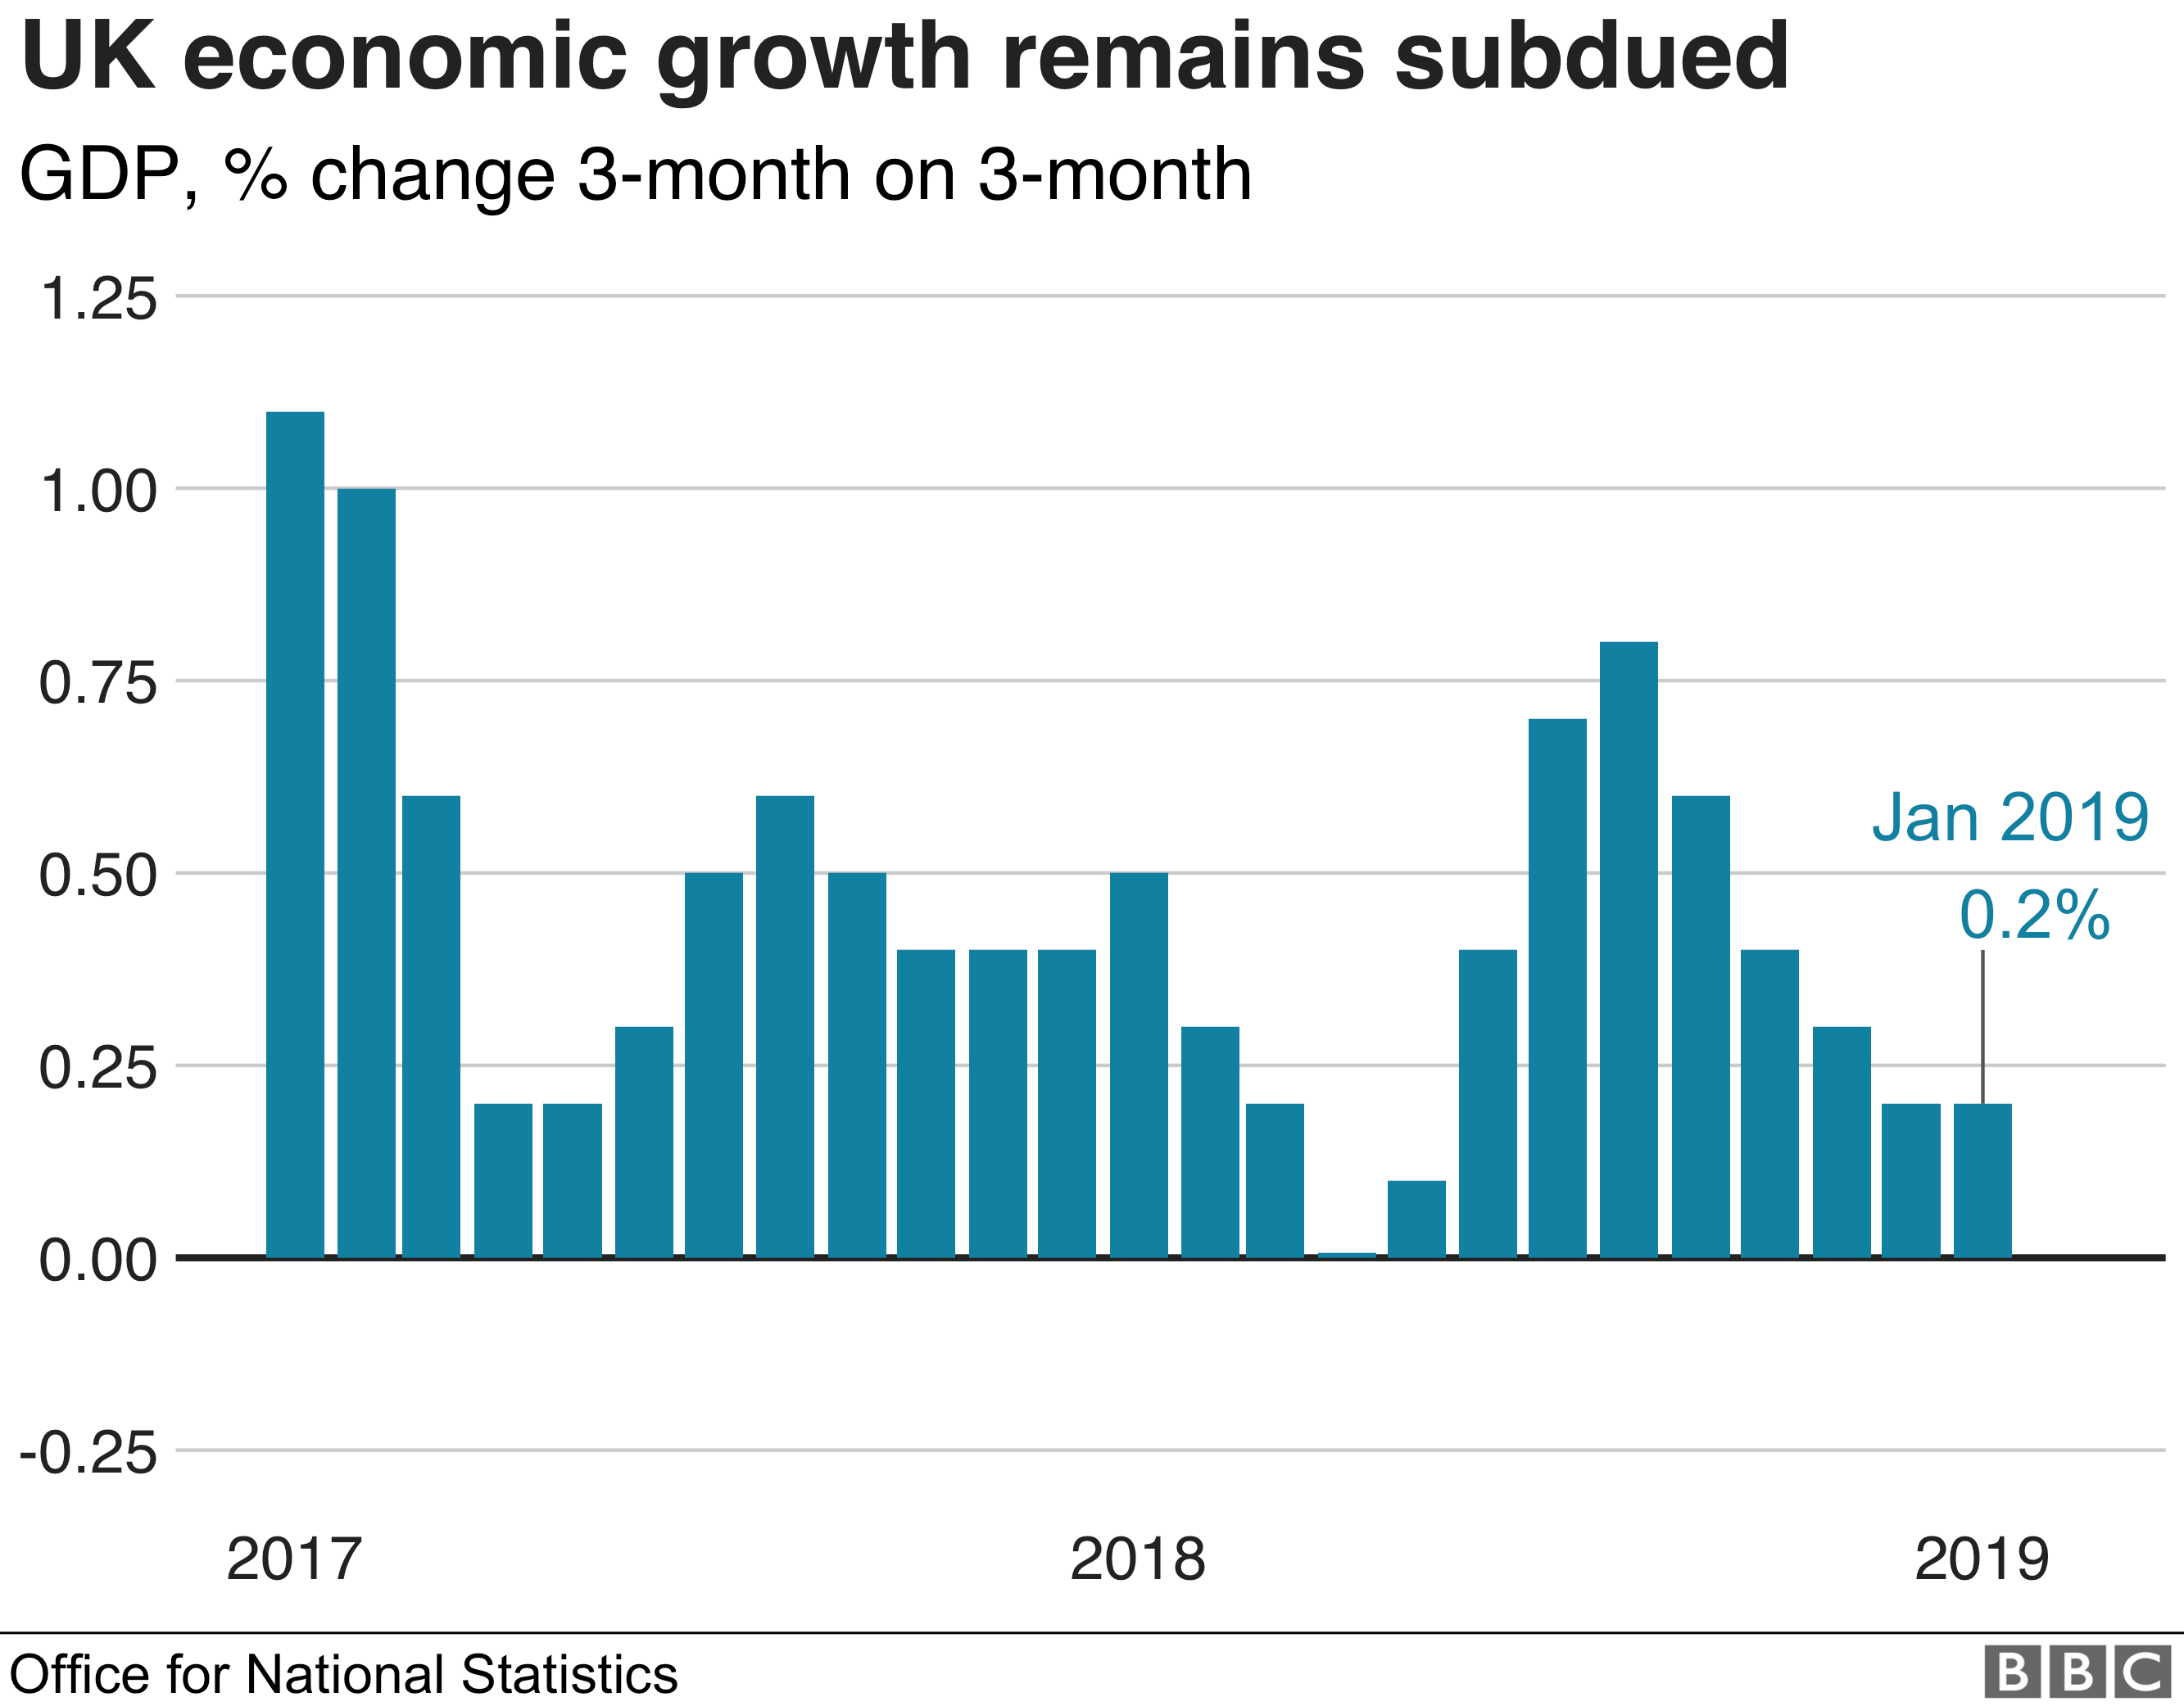 UK economic growth in the three months to January